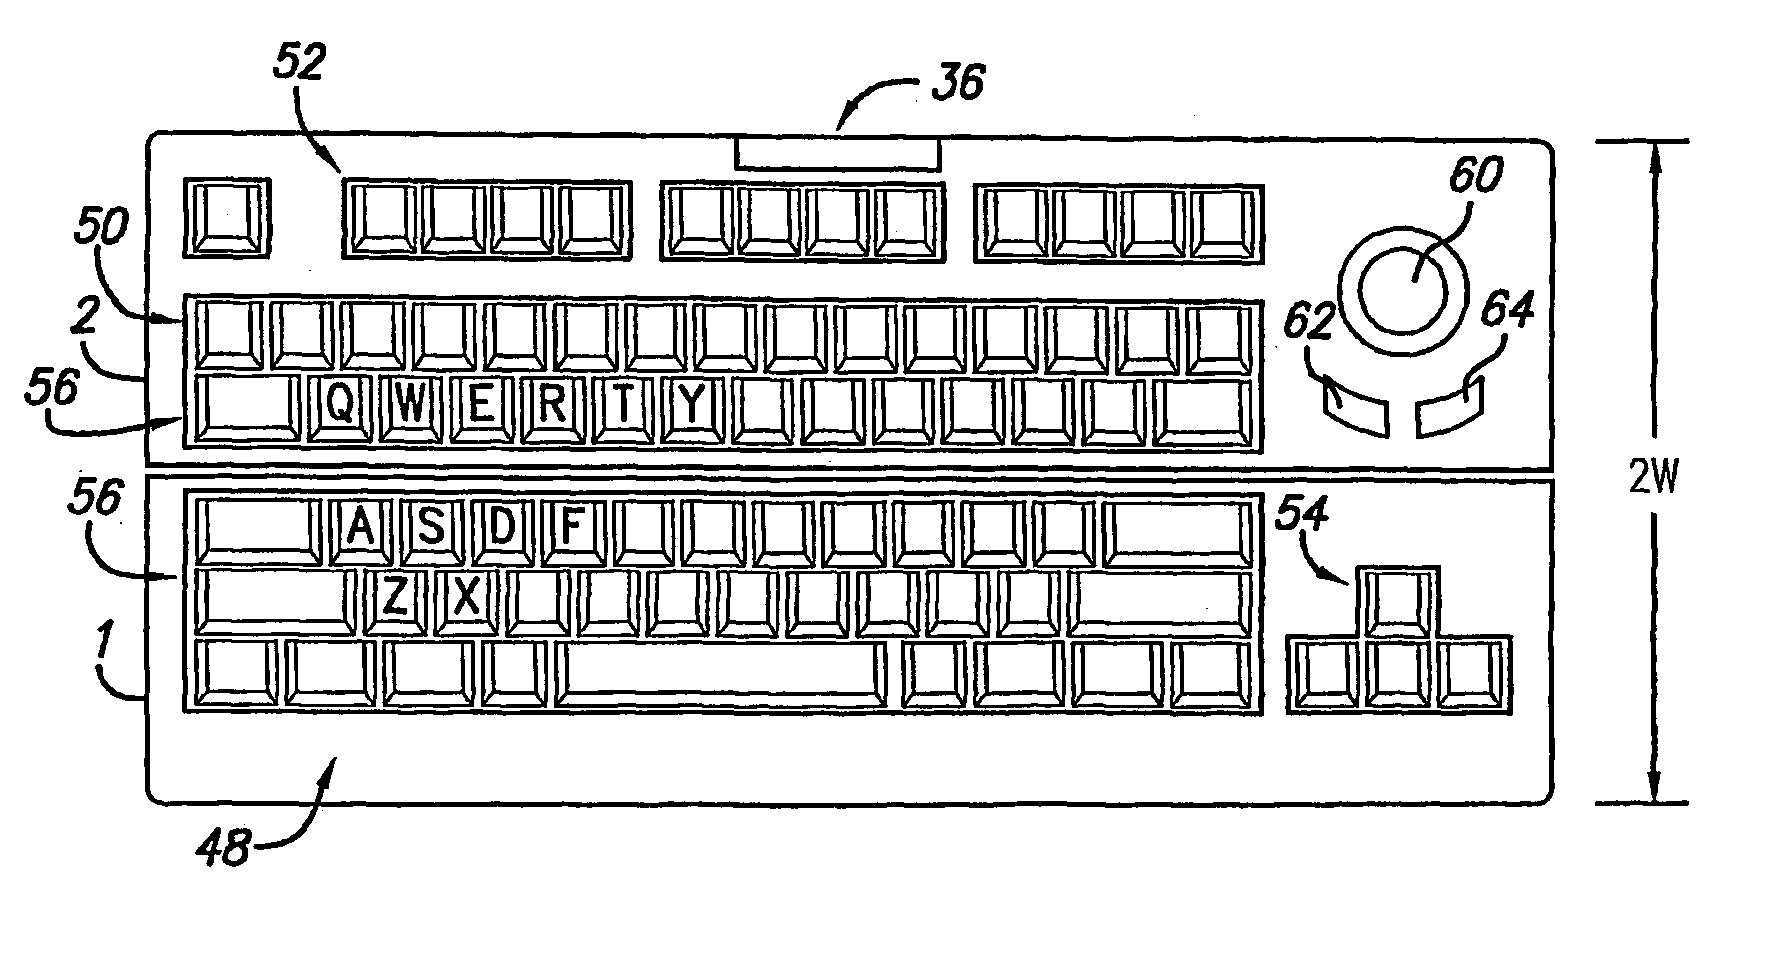 Remote control method using remote control device with keyboard